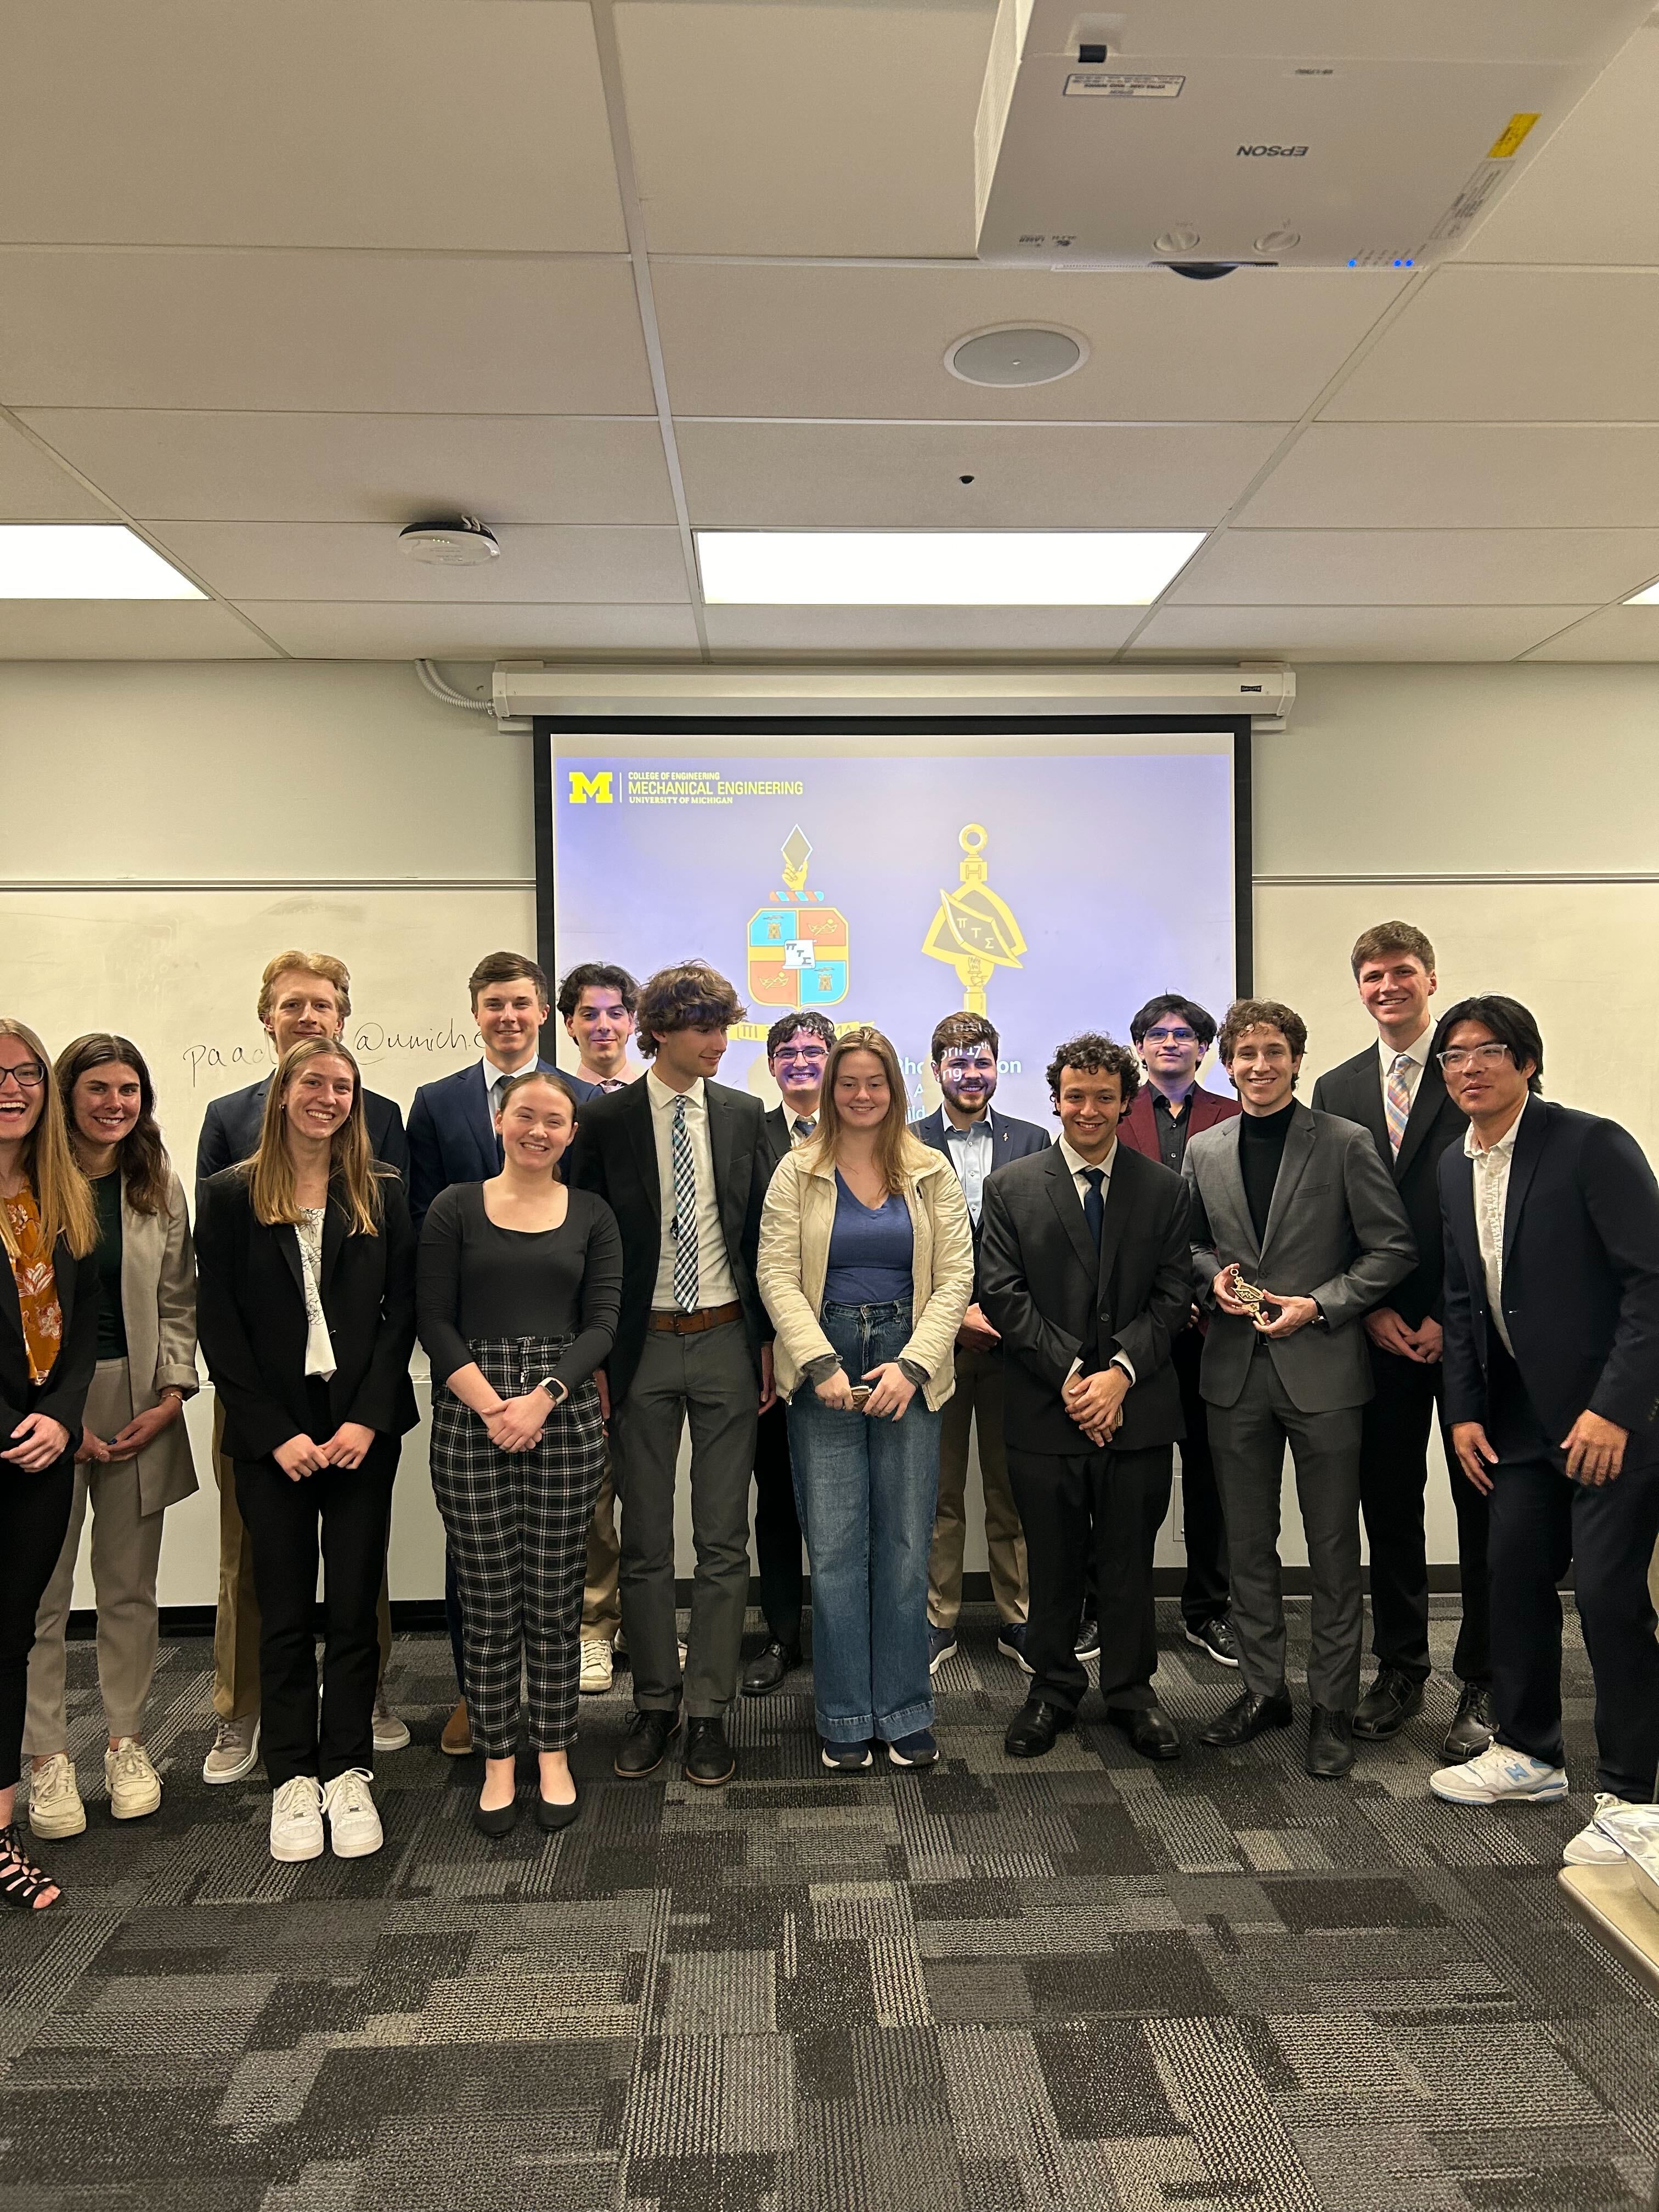 Officers and Initiates from left to right: Marissa May, Lauren Berry, Kayla Mazure, Pierce Bednas, Daniel Stack, Lexi Martin, Ben Andelman, Billy Waite, Owen Sayer, Alison Brei, Jack Evans, Pedro Bignotto Racchetti, Jorge Luna, Nate Giessner, Trever Perl, and Josiah Wong